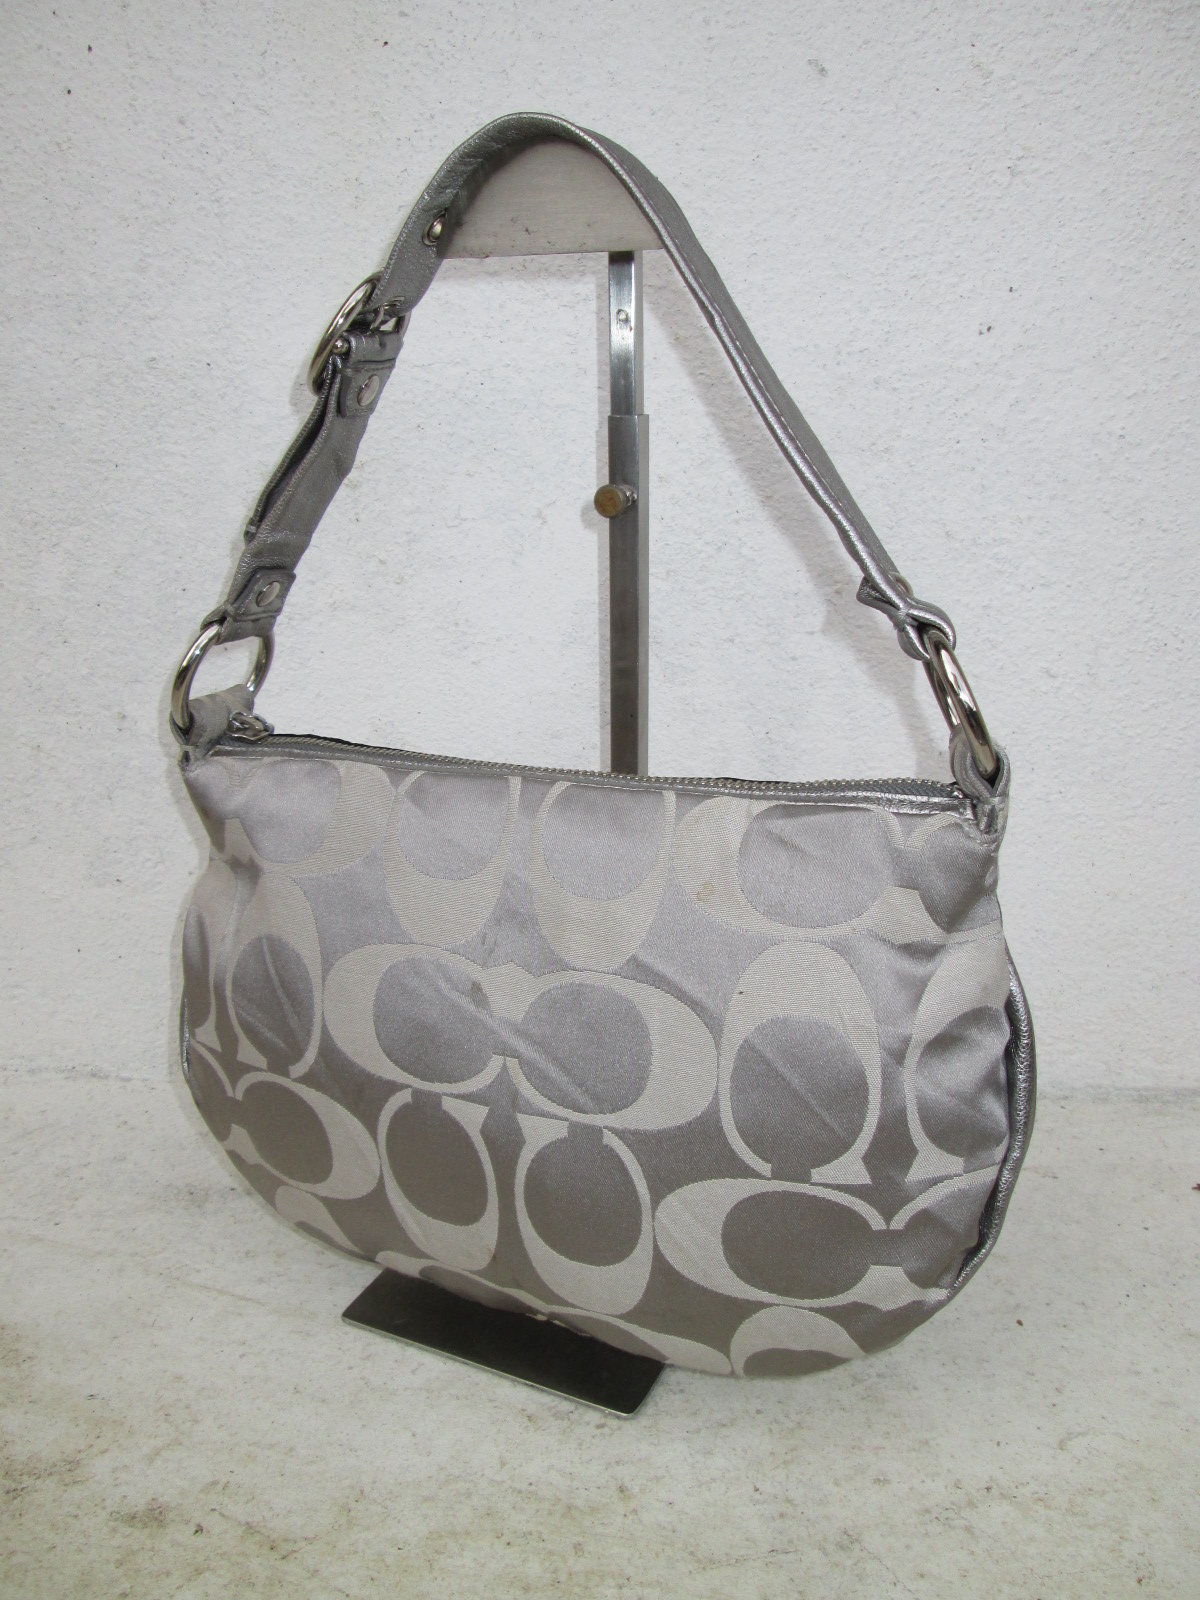 d0rayakEEbaG: Authentic Coach Signature Hobo Bag(SOLD)